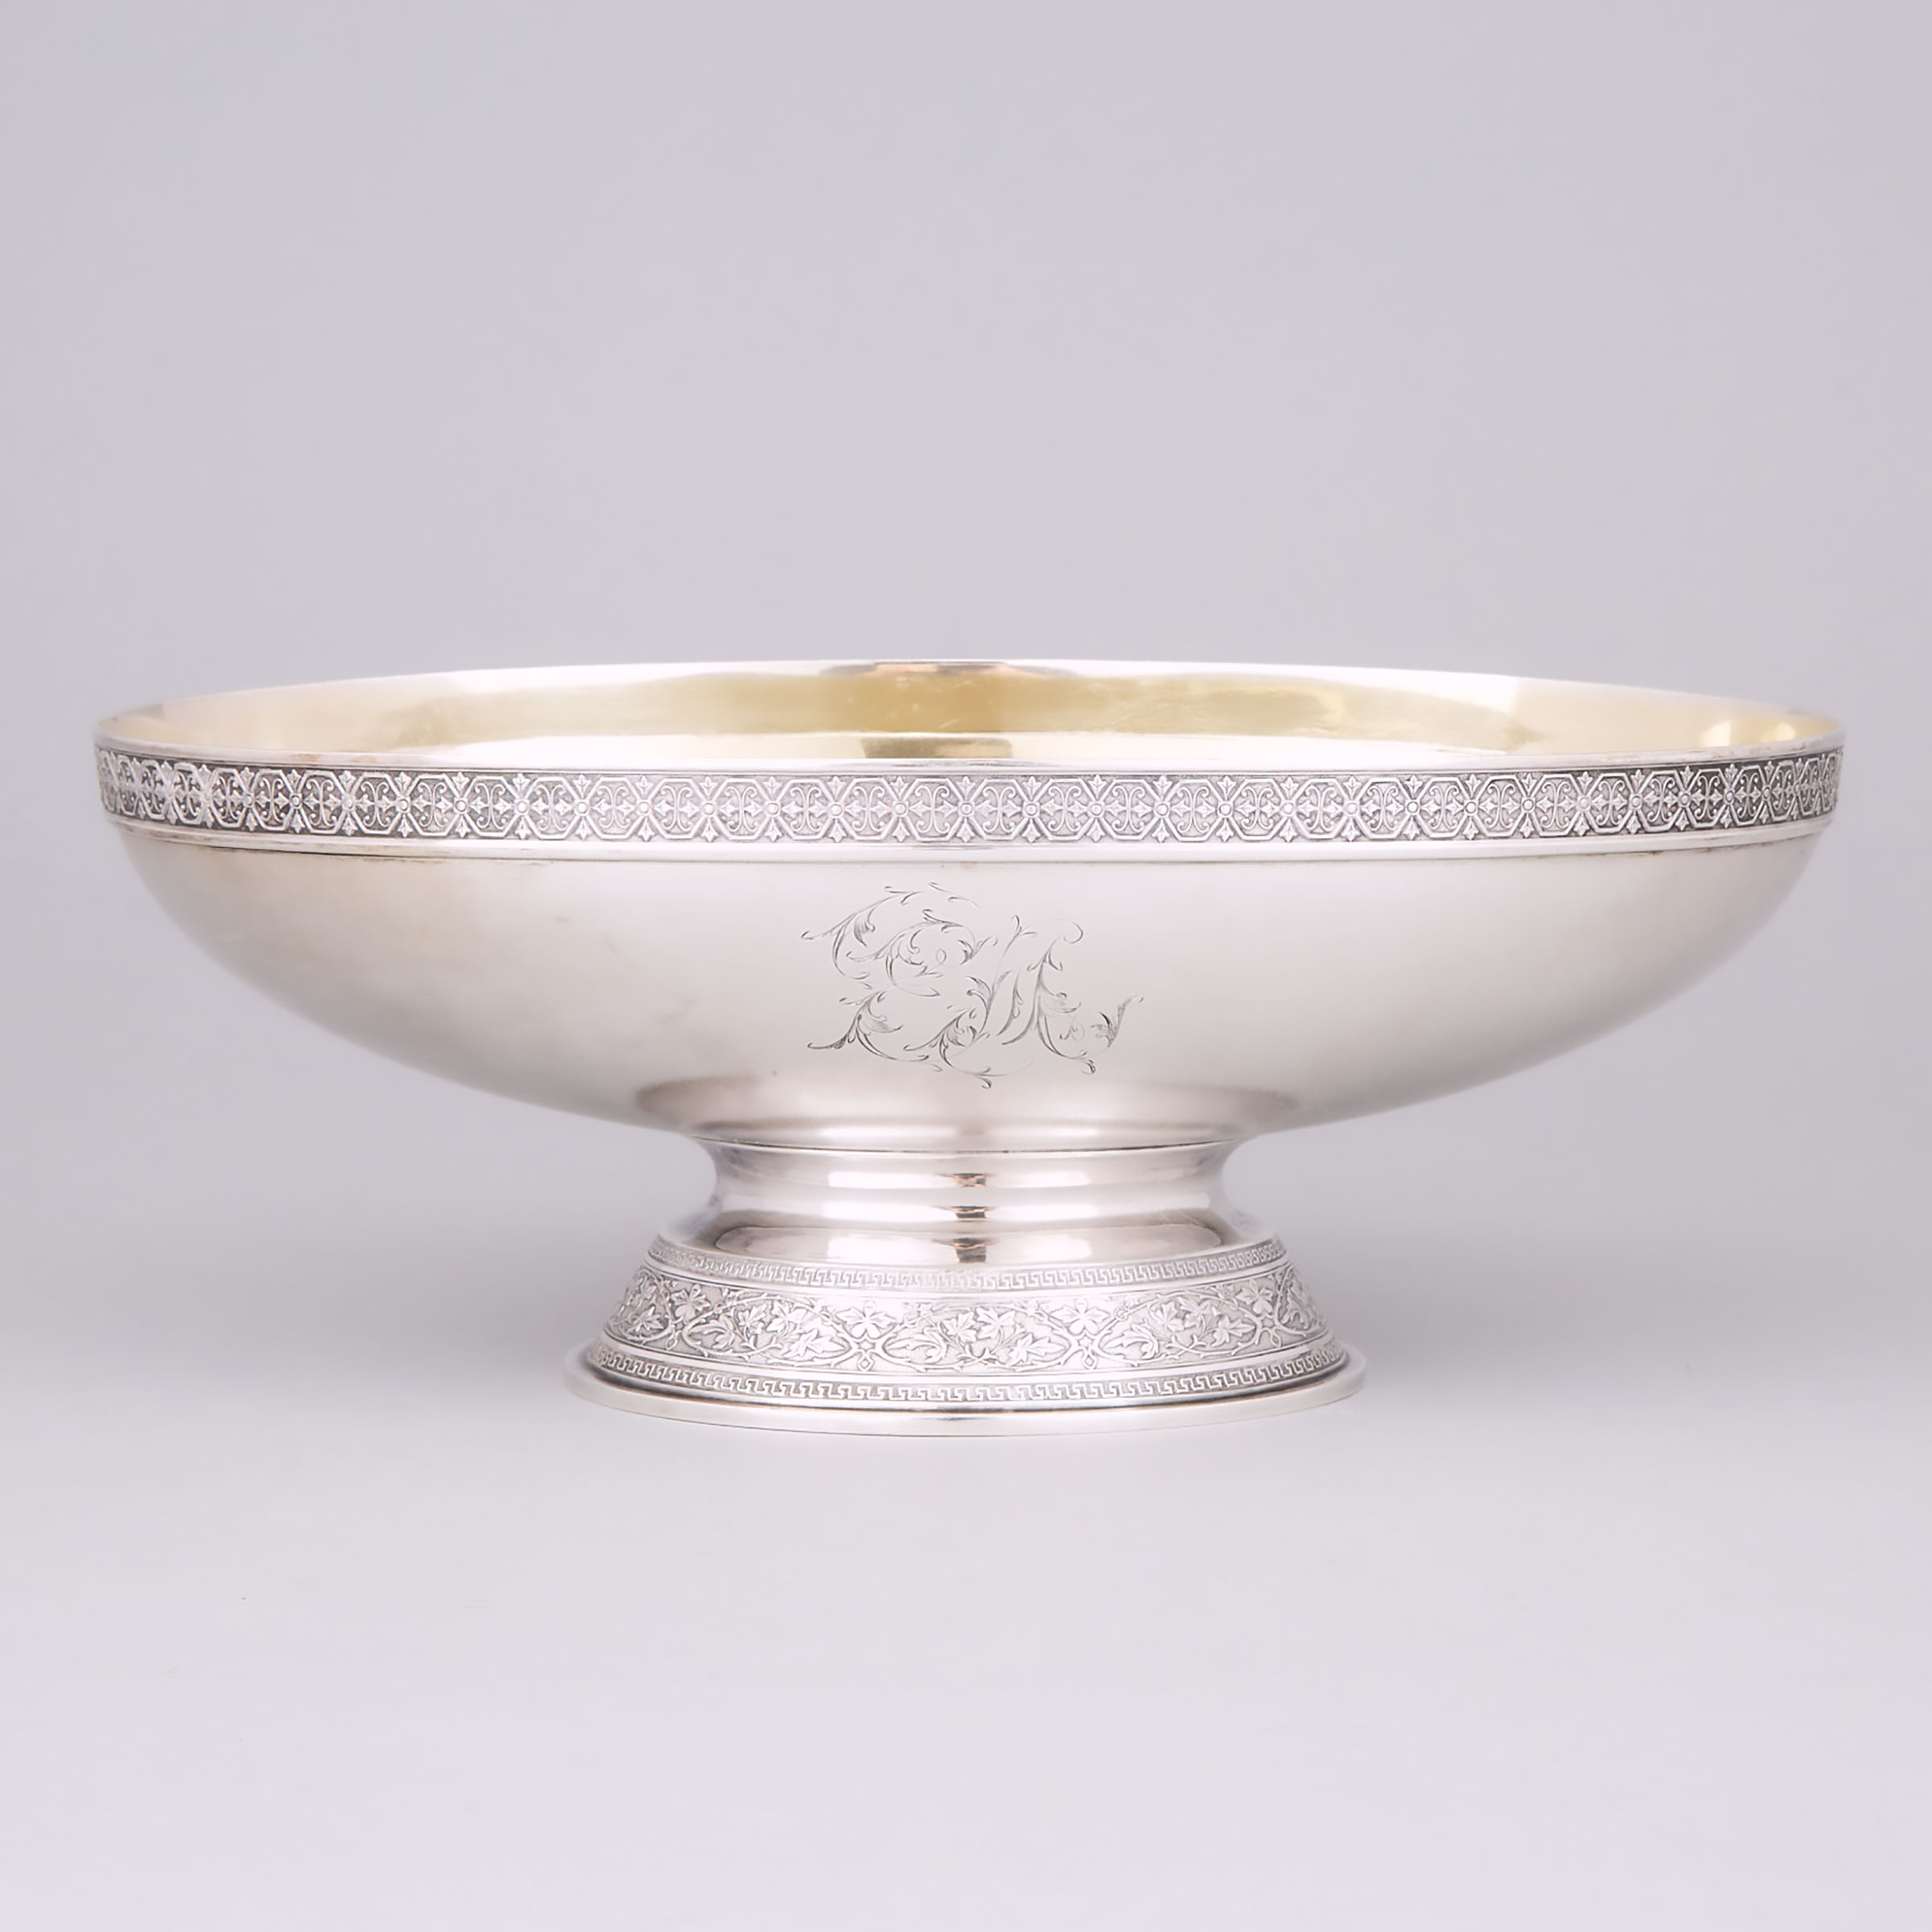 American Silver Oval Footed Bowl, Gorham Mfg. Co., Providence, R.I., 1874